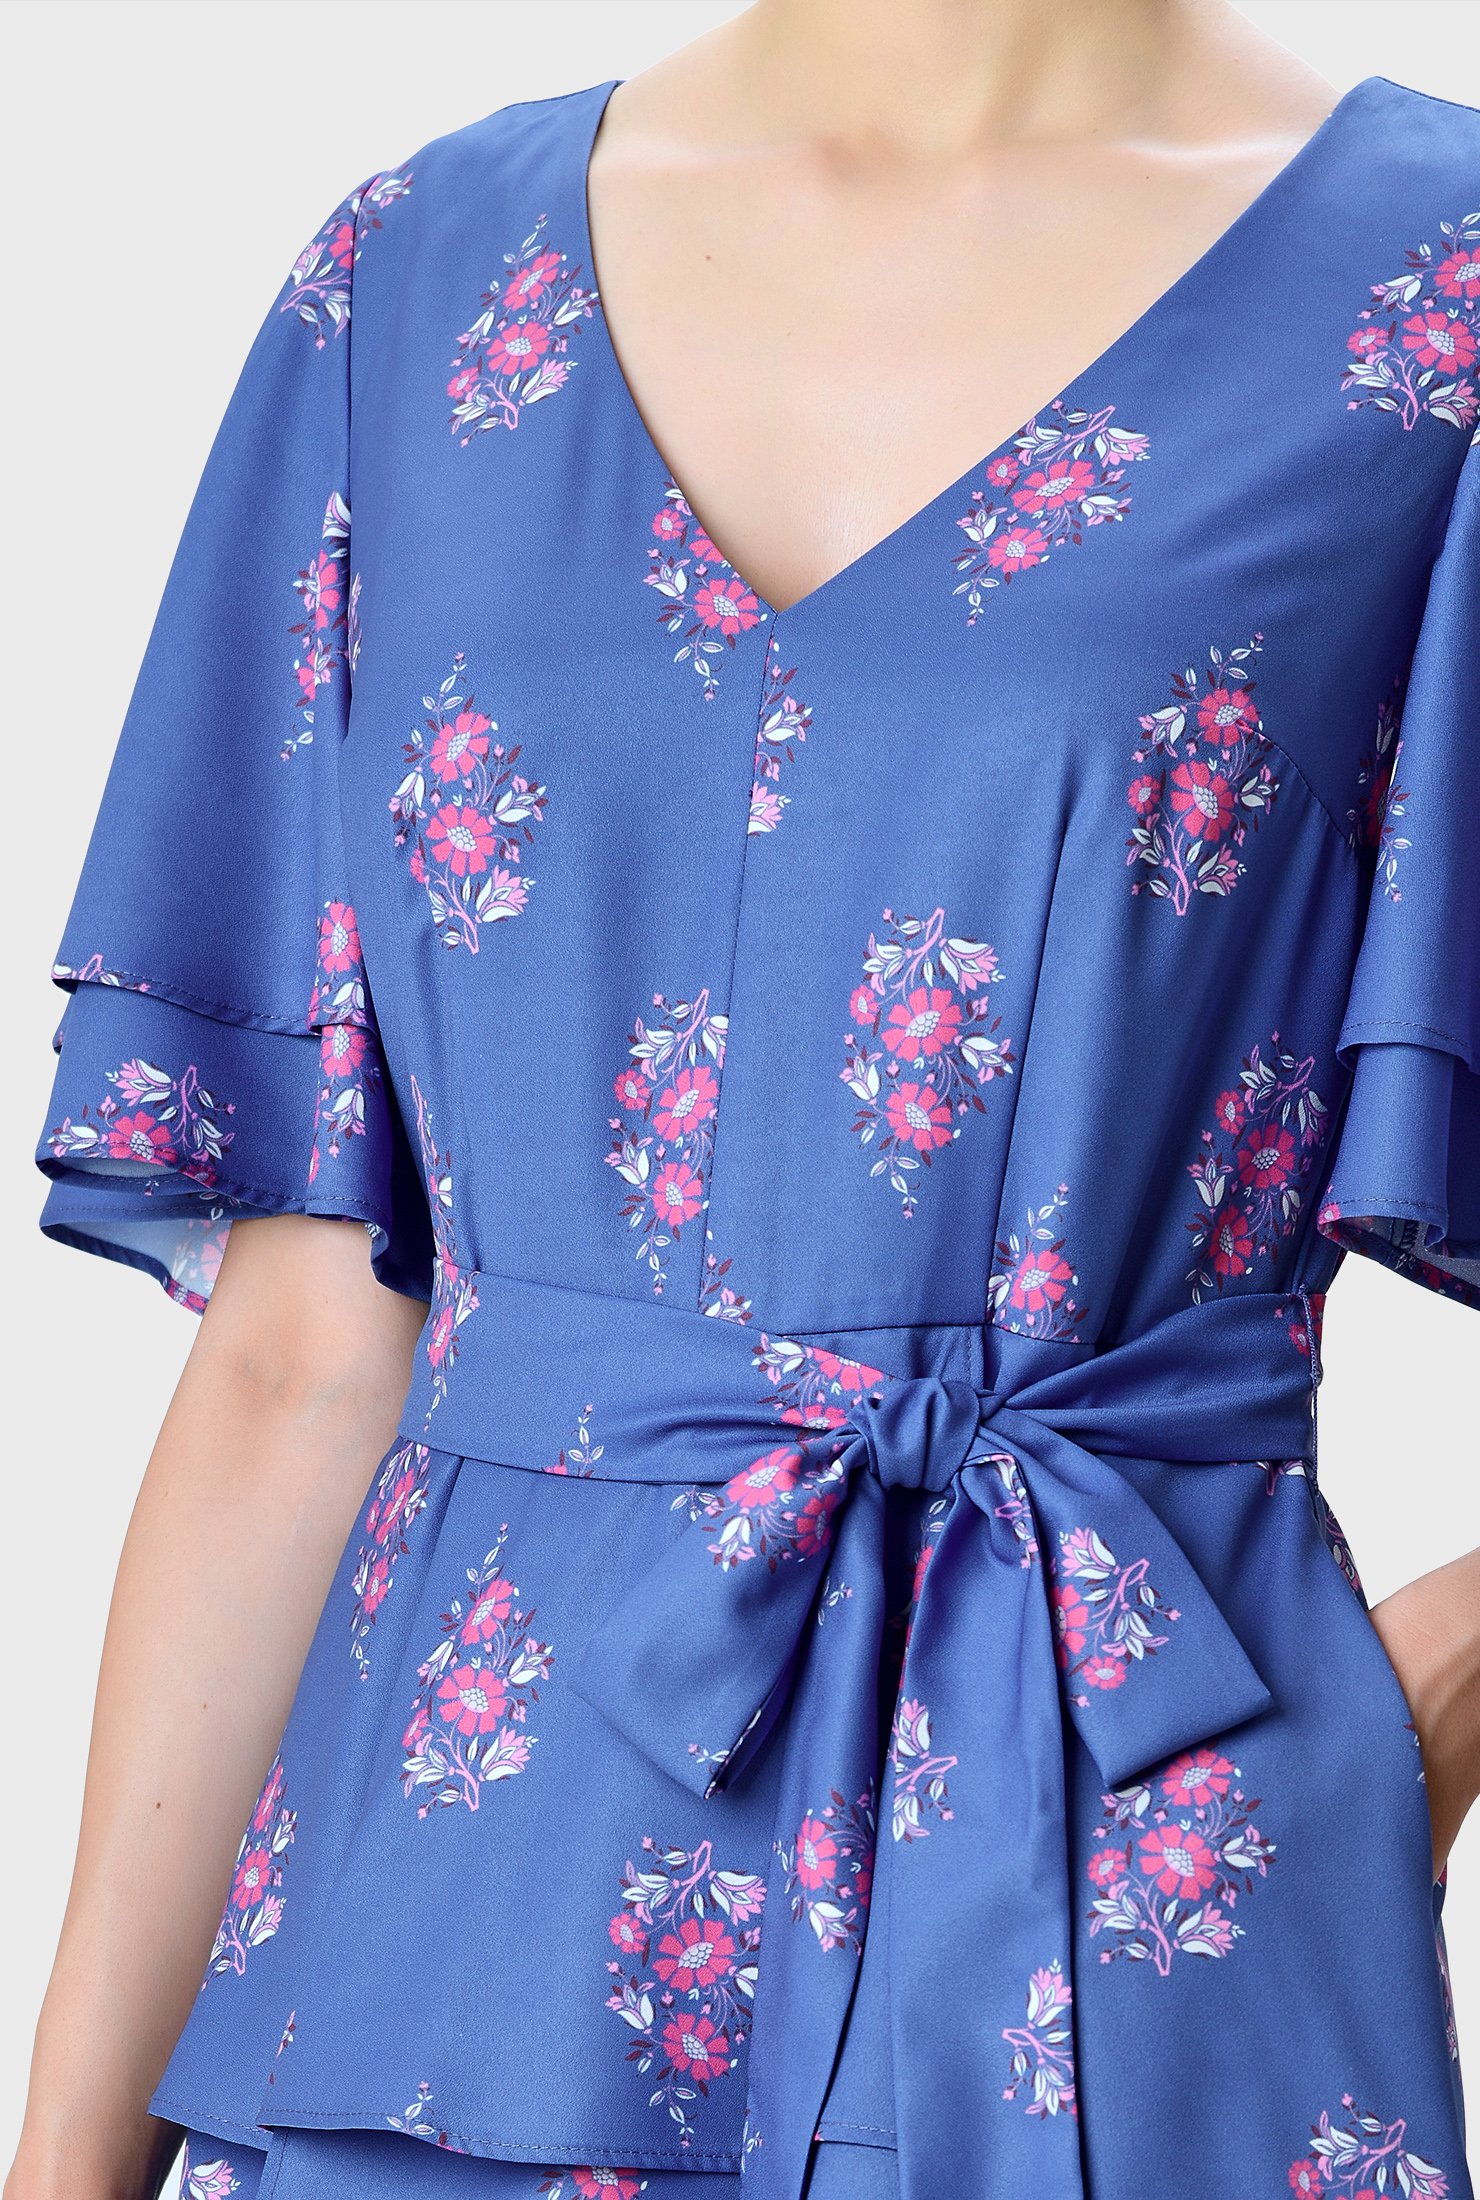 A summer stunner! Fluttering ruffles cascade down the sleeves and asymmetric tier skirt of our floral print crepe fit-and-flare dress that will bring feminine charm and a bit of romance to your upcoming events.